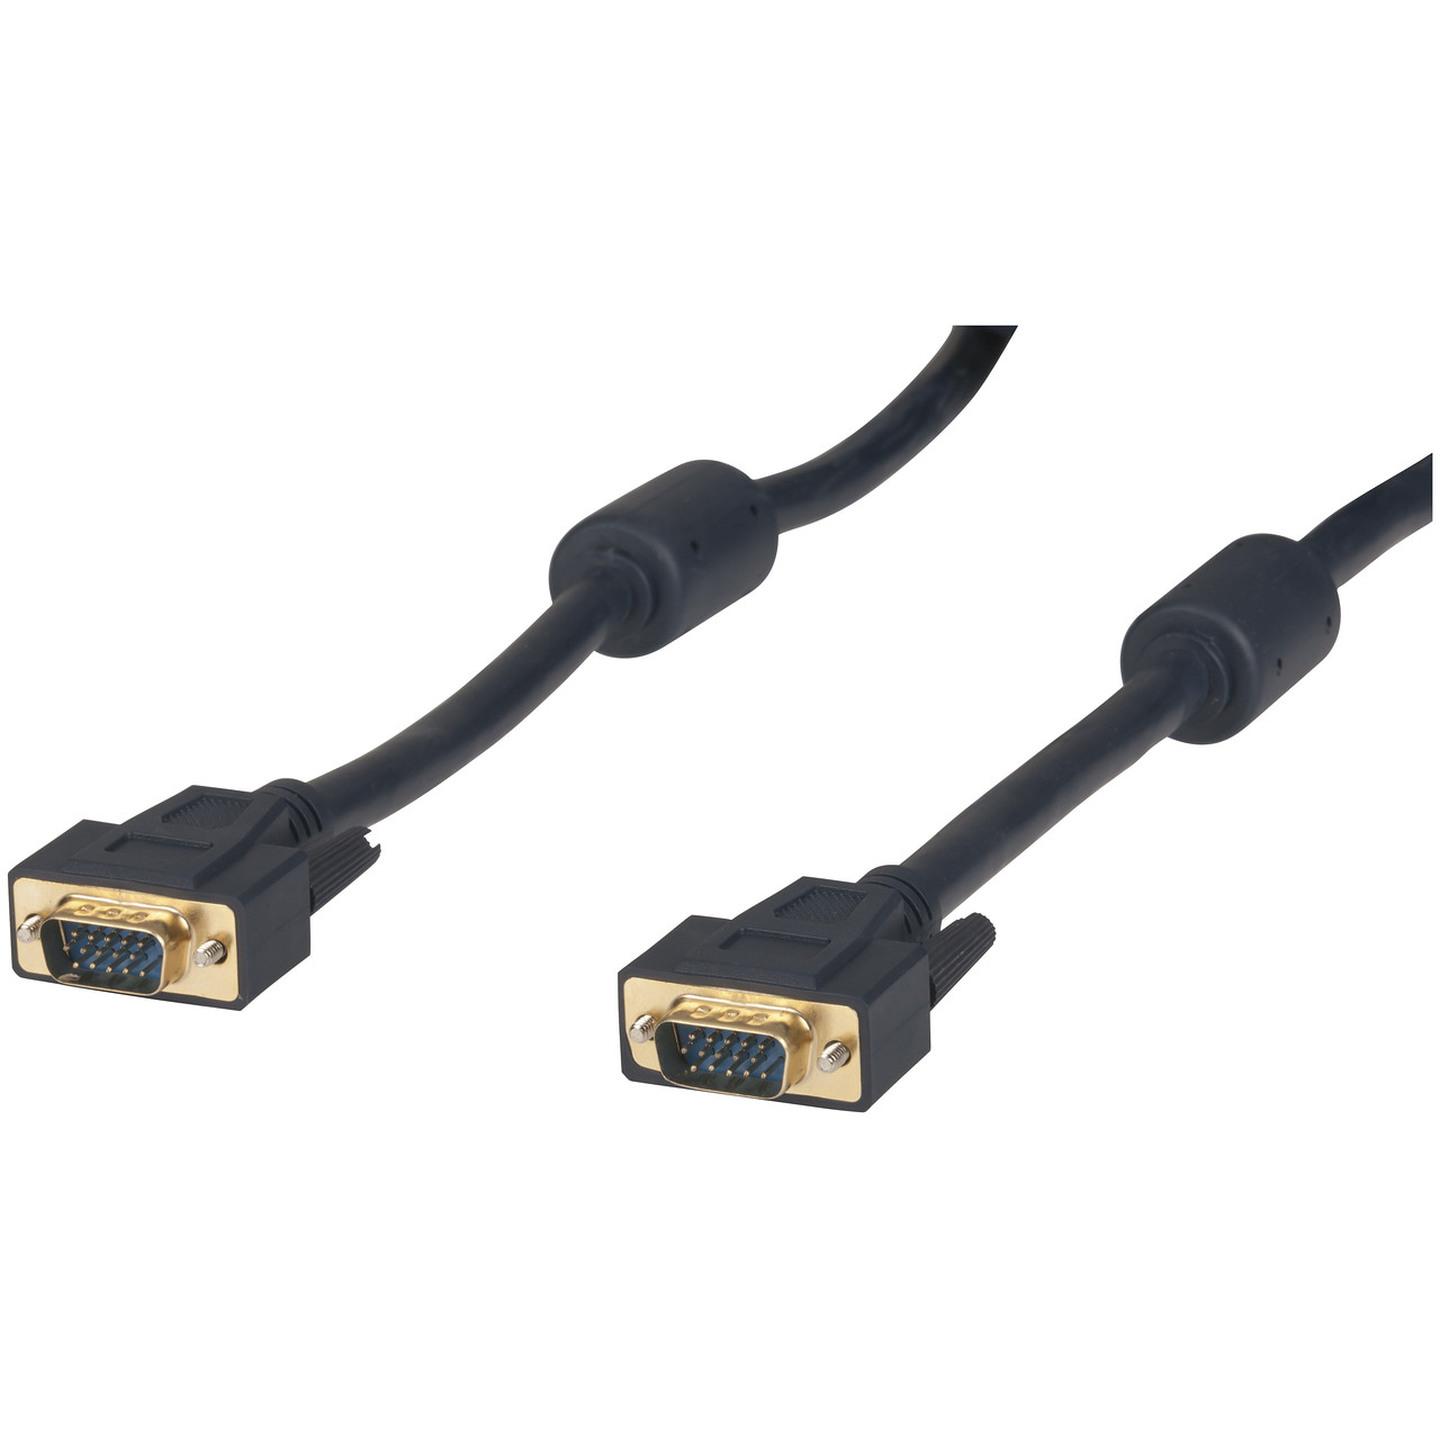 D15HD Plug to D15HD plug Video Cable - 10m